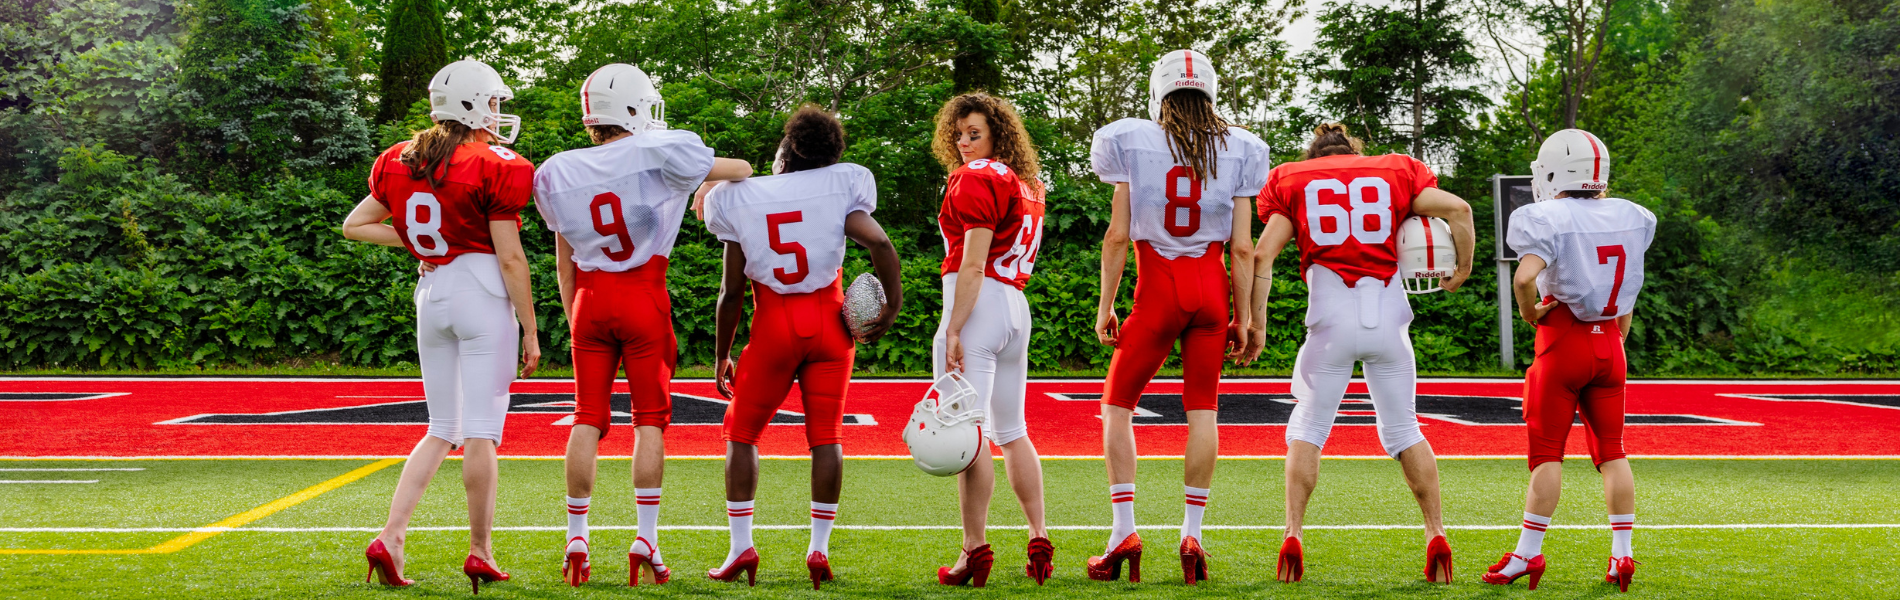 A row of people facing away wearing red and white football uniforms and red high heels, the person in the centre is looking back at the camera